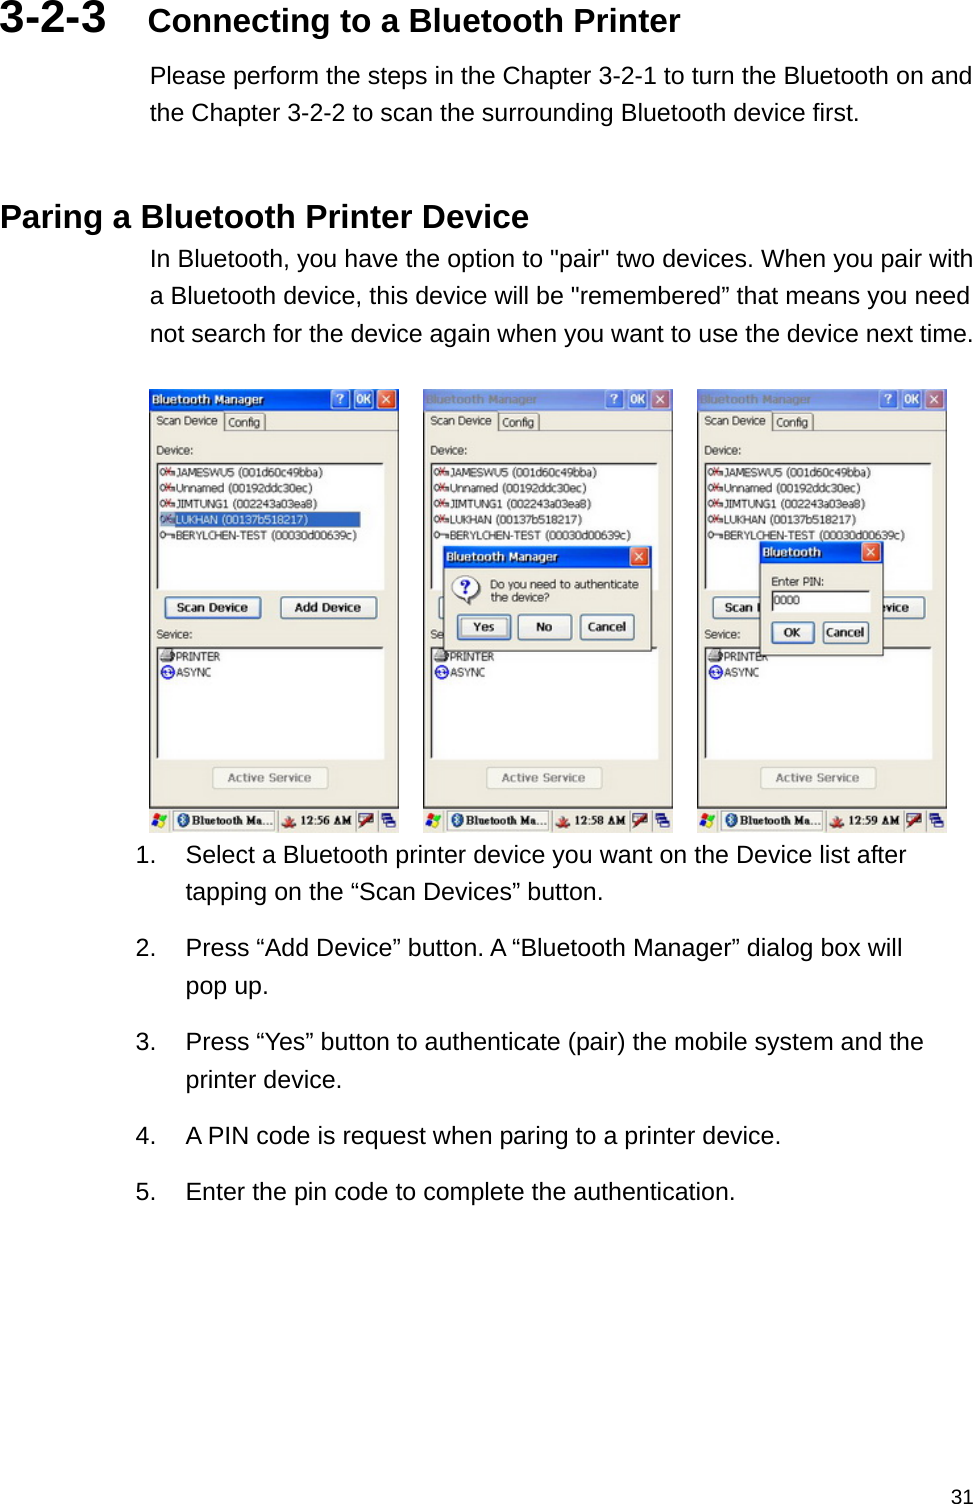   313-2-3  Connecting to a Bluetooth Printer Please perform the steps in the Chapter 3-2-1 to turn the Bluetooth on and the Chapter 3-2-2 to scan the surrounding Bluetooth device first.   Paring a Bluetooth Printer Device In Bluetooth, you have the option to &quot;pair&quot; two devices. When you pair with a Bluetooth device, this device will be &quot;remembered” that means you need not search for the device again when you want to use the device next time.           1.  Select a Bluetooth printer device you want on the Device list after tapping on the “Scan Devices” button. 2.  Press “Add Device” button. A “Bluetooth Manager” dialog box will pop up.   3.  Press “Yes” button to authenticate (pair) the mobile system and the printer device.   4.  A PIN code is request when paring to a printer device. 5.  Enter the pin code to complete the authentication.   